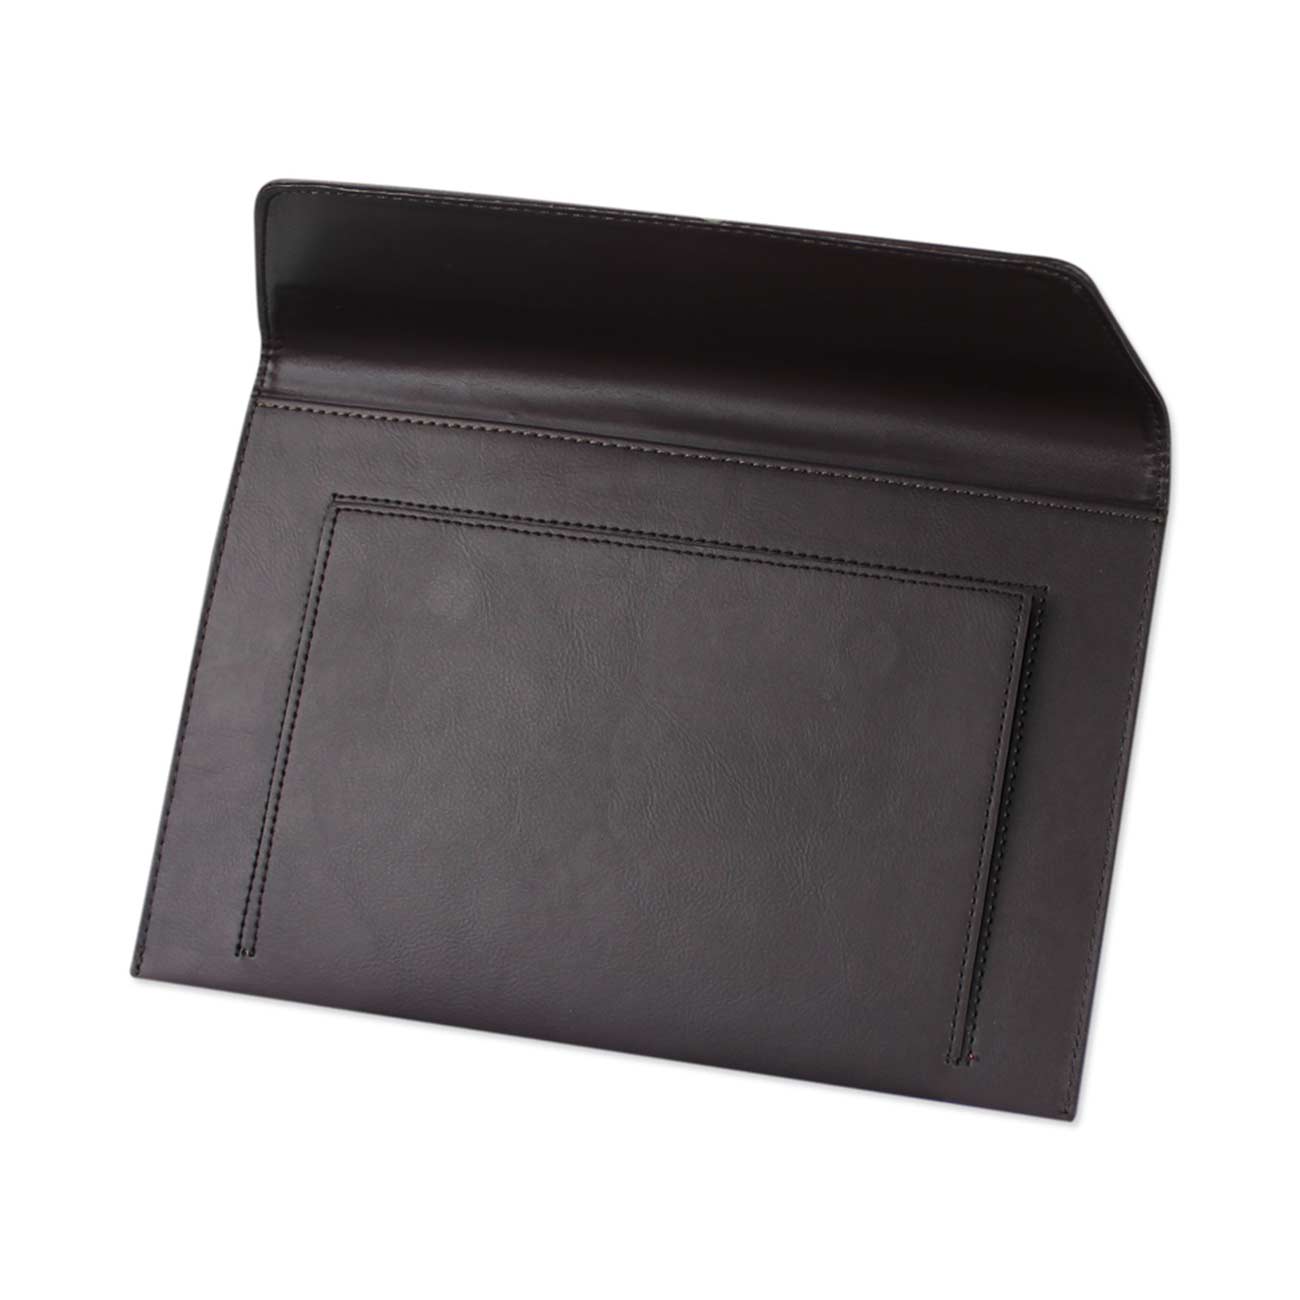 REIKO PREMIUM LEATHER CASE POUCH FOR 7INCHES IPADS AND TABLETS In BROWN